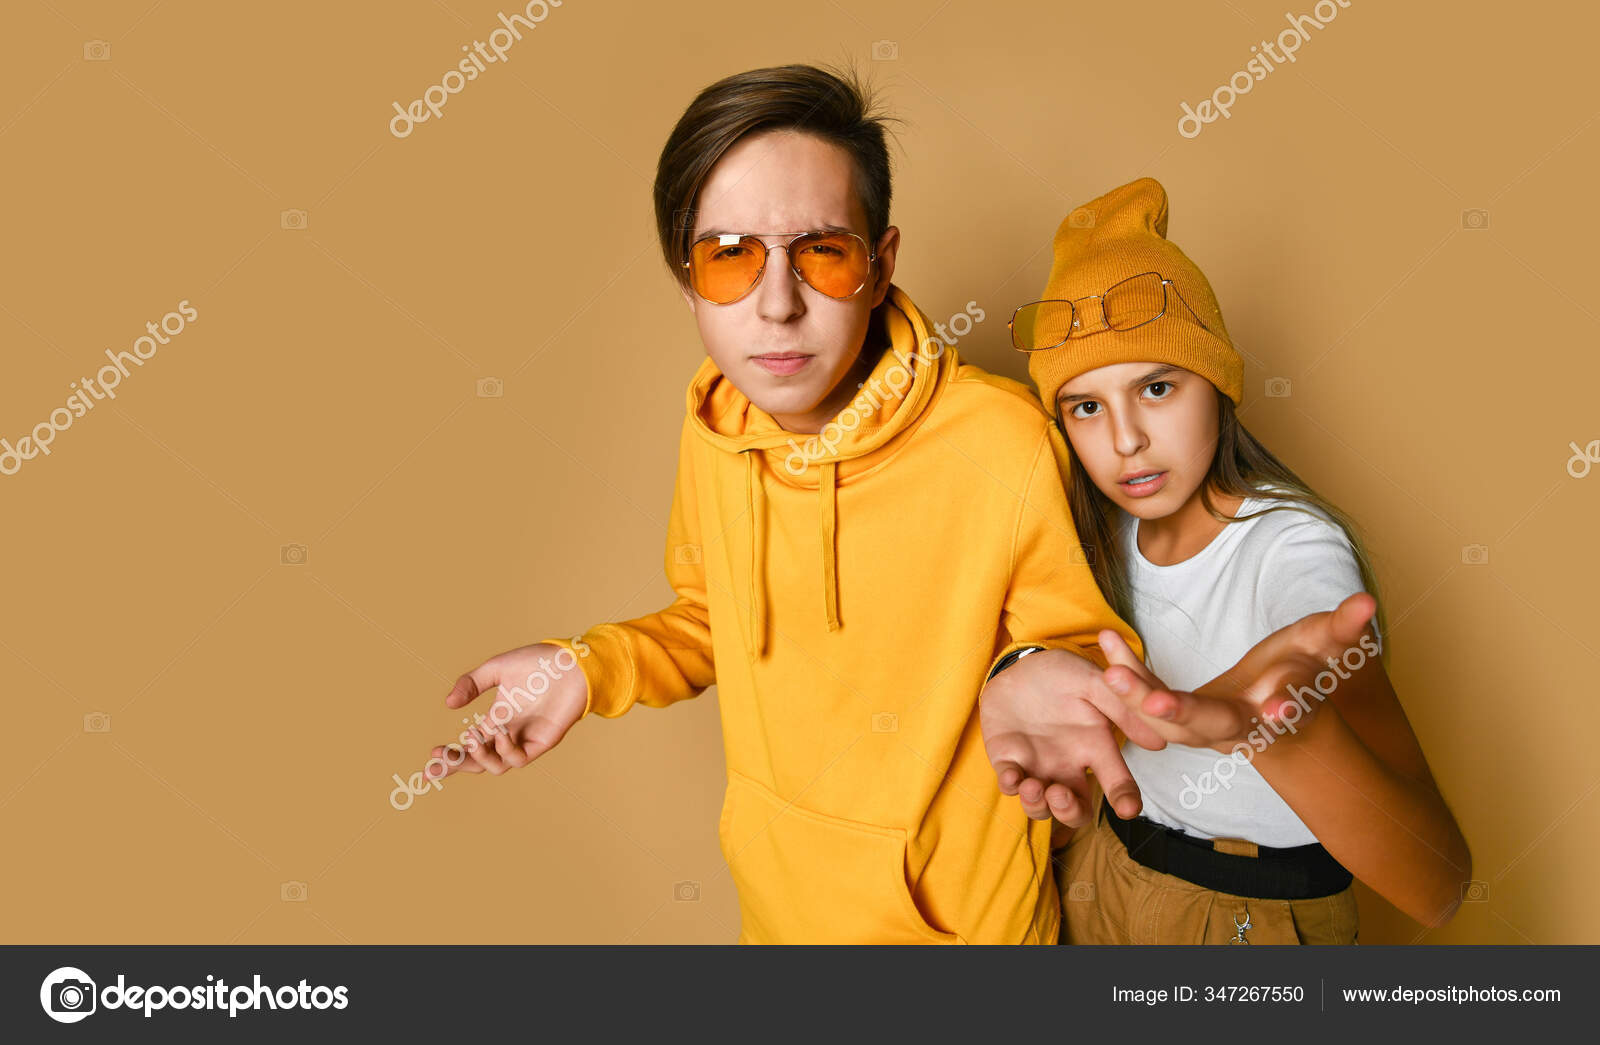 Young teens boy and girl in comfortable clothing, hats and sunglasses  standing and expressing misunderstanding — Stock Photo © ddkolos.gmail.com  #347267550